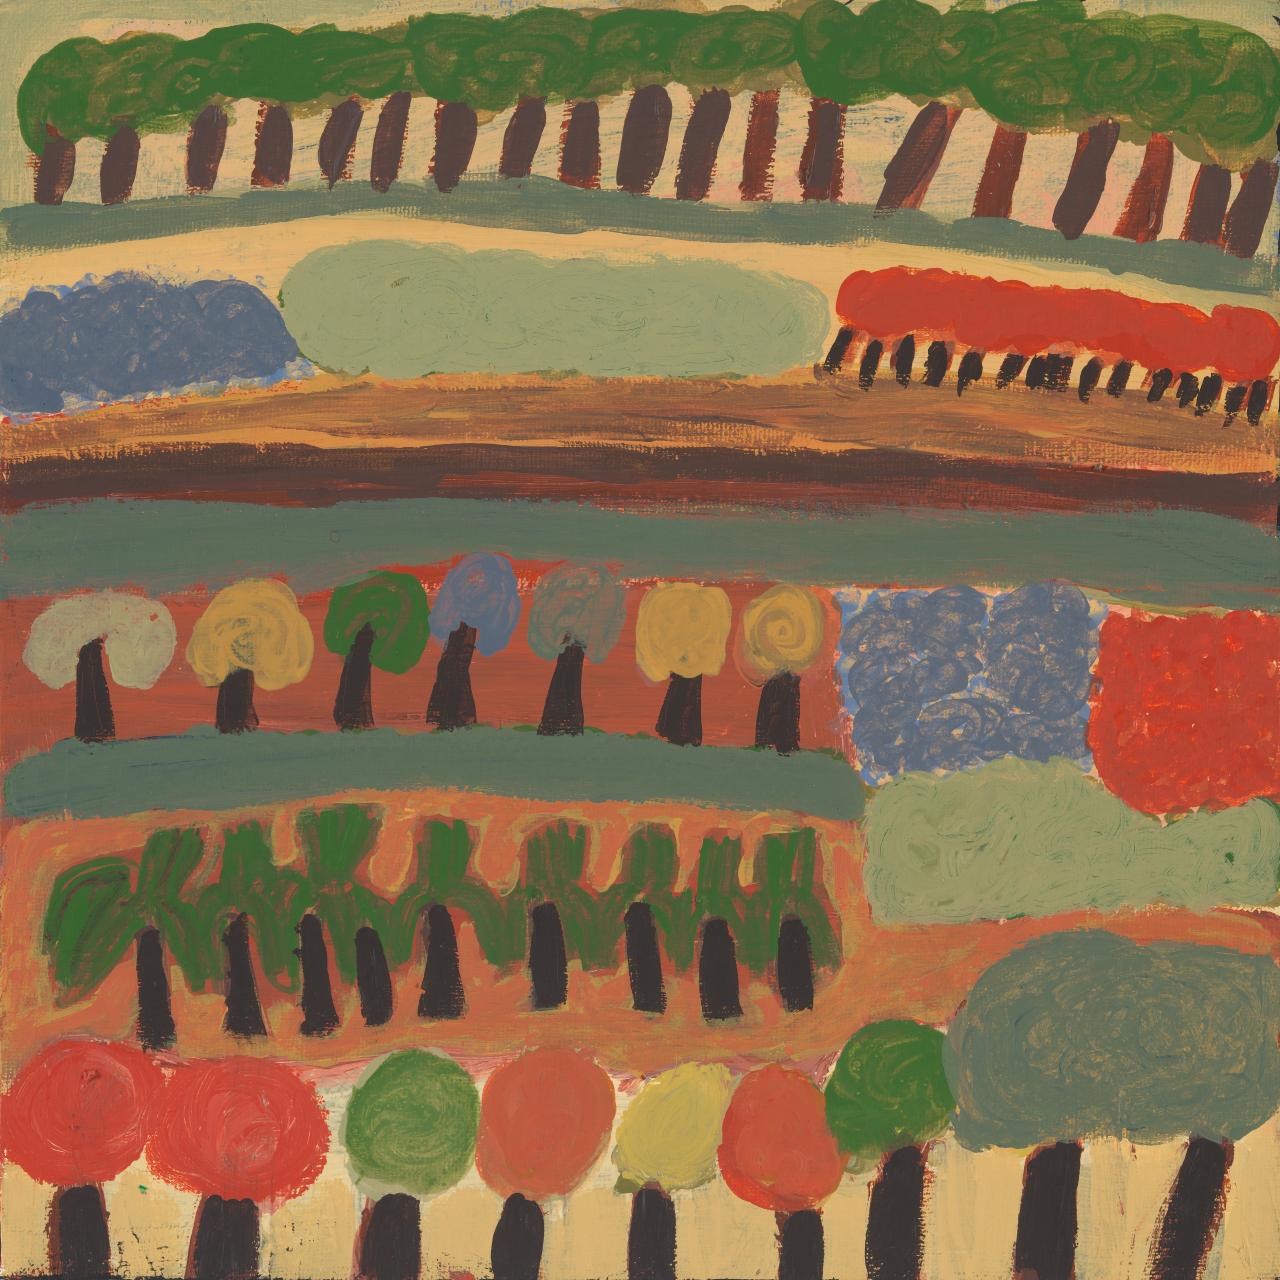  Rosemary Gutili,  Galiwin’ku Farm,  synthetic polymer paint on canvas, 30 x 30 cm, 2010. (National Gallery of Victoria) 